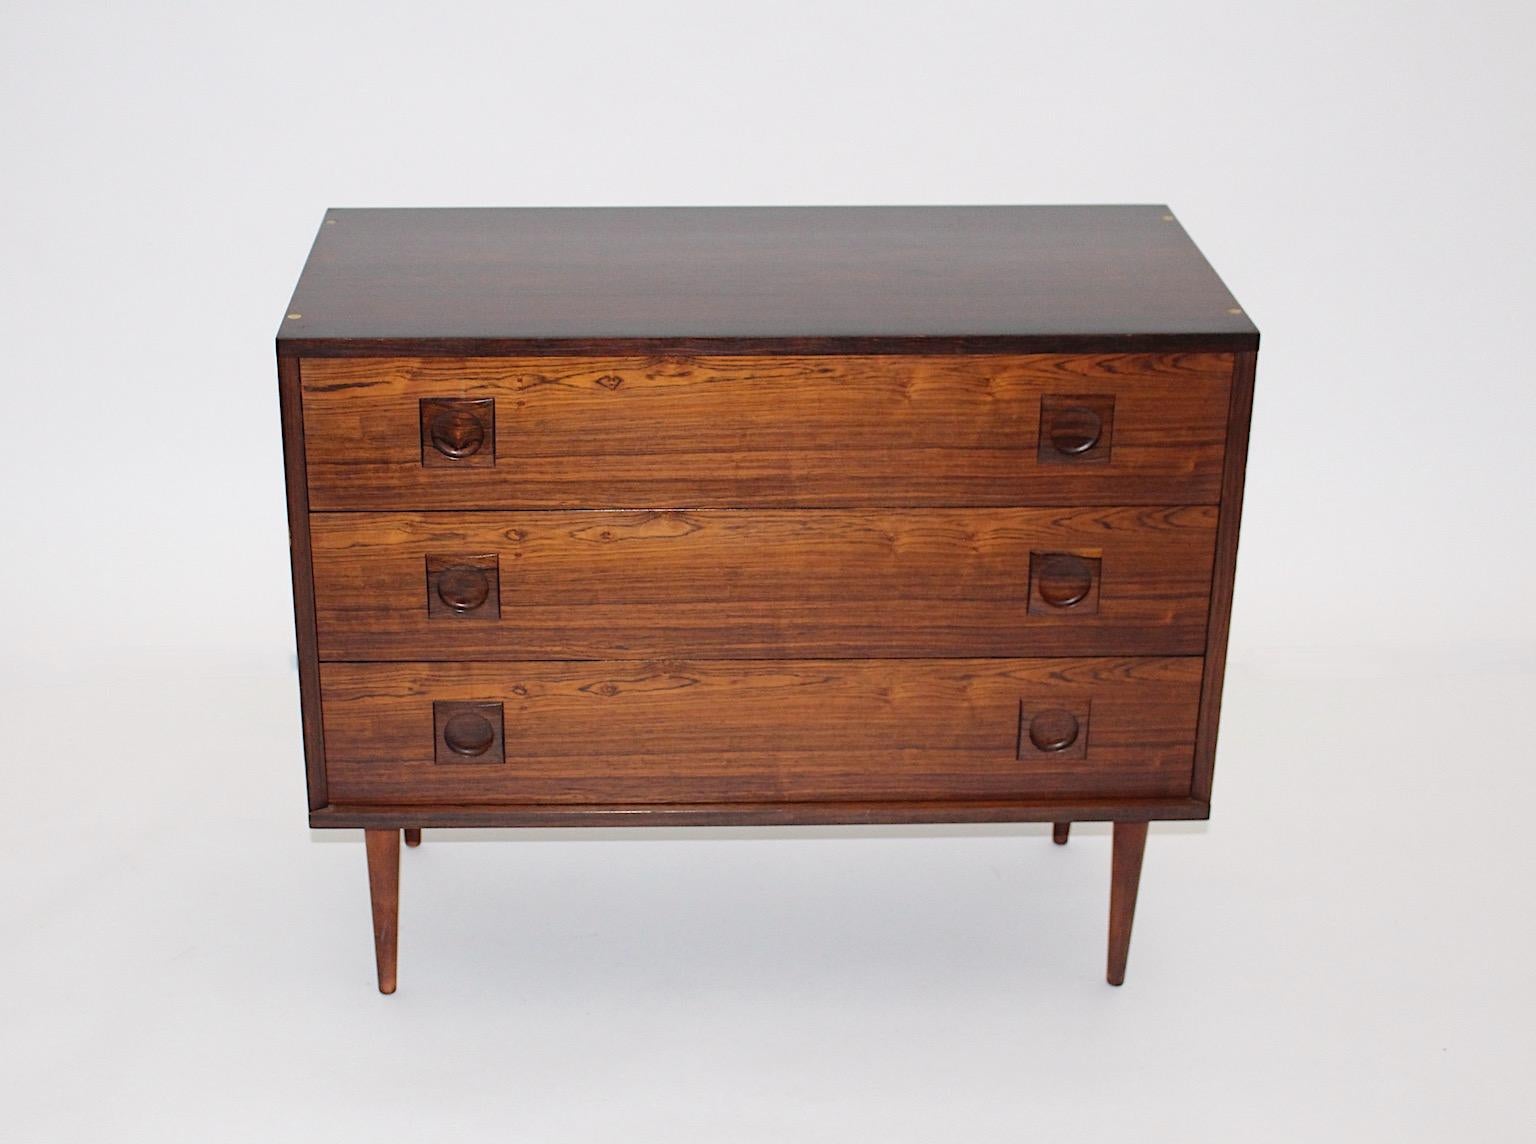 Scandinavian Modern Organic Vintage Brown Teak Chest or Commodes 1960s, Denmark In Good Condition For Sale In Vienna, AT